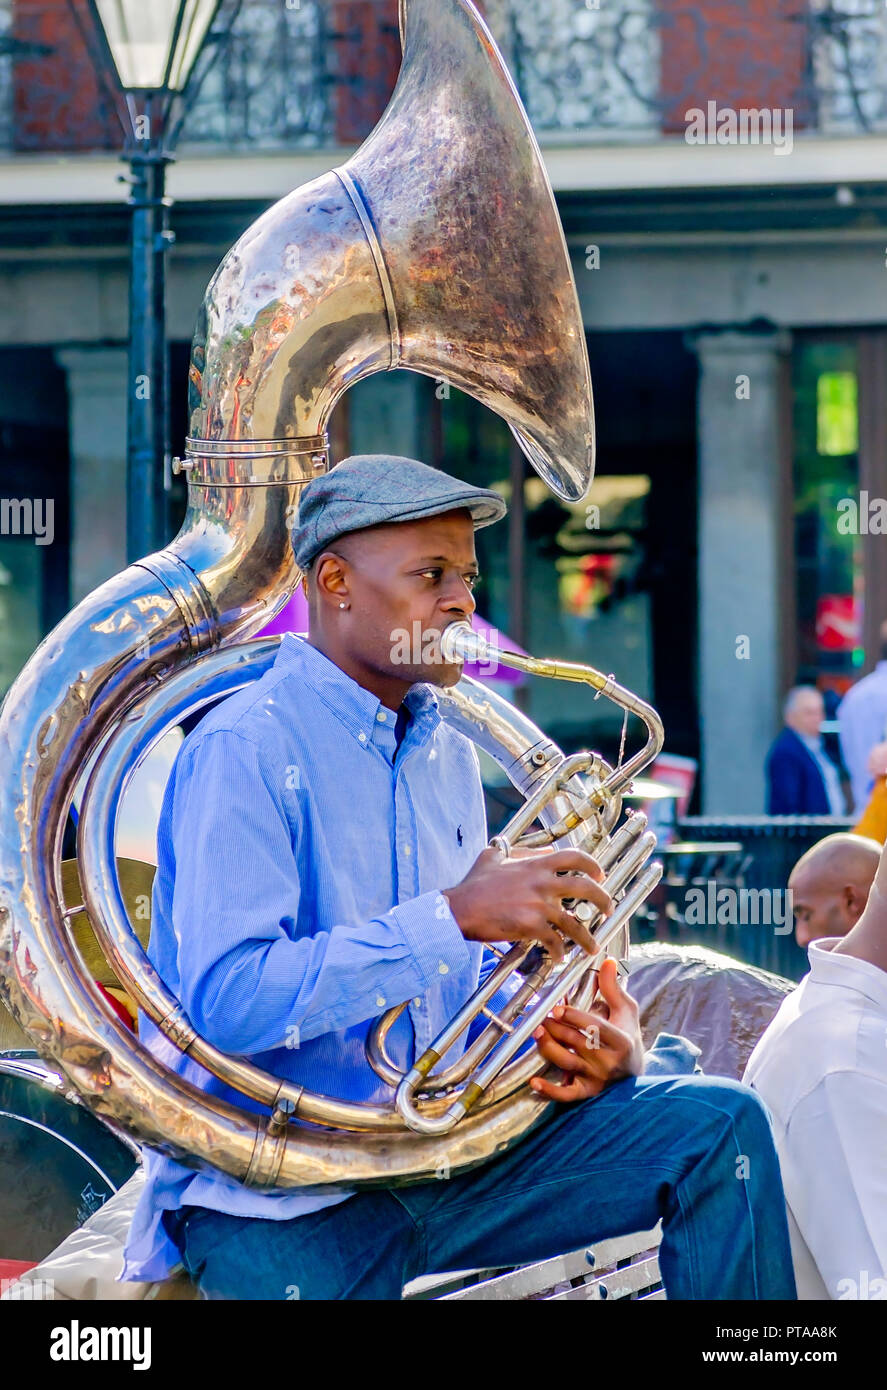 A street musician plays a tuba in the French Quarter, Nov. 15, 2015, in New Orleans, Louisiana. (Photo by Carmen K. Sisson/Cloudybright) Stock Photo